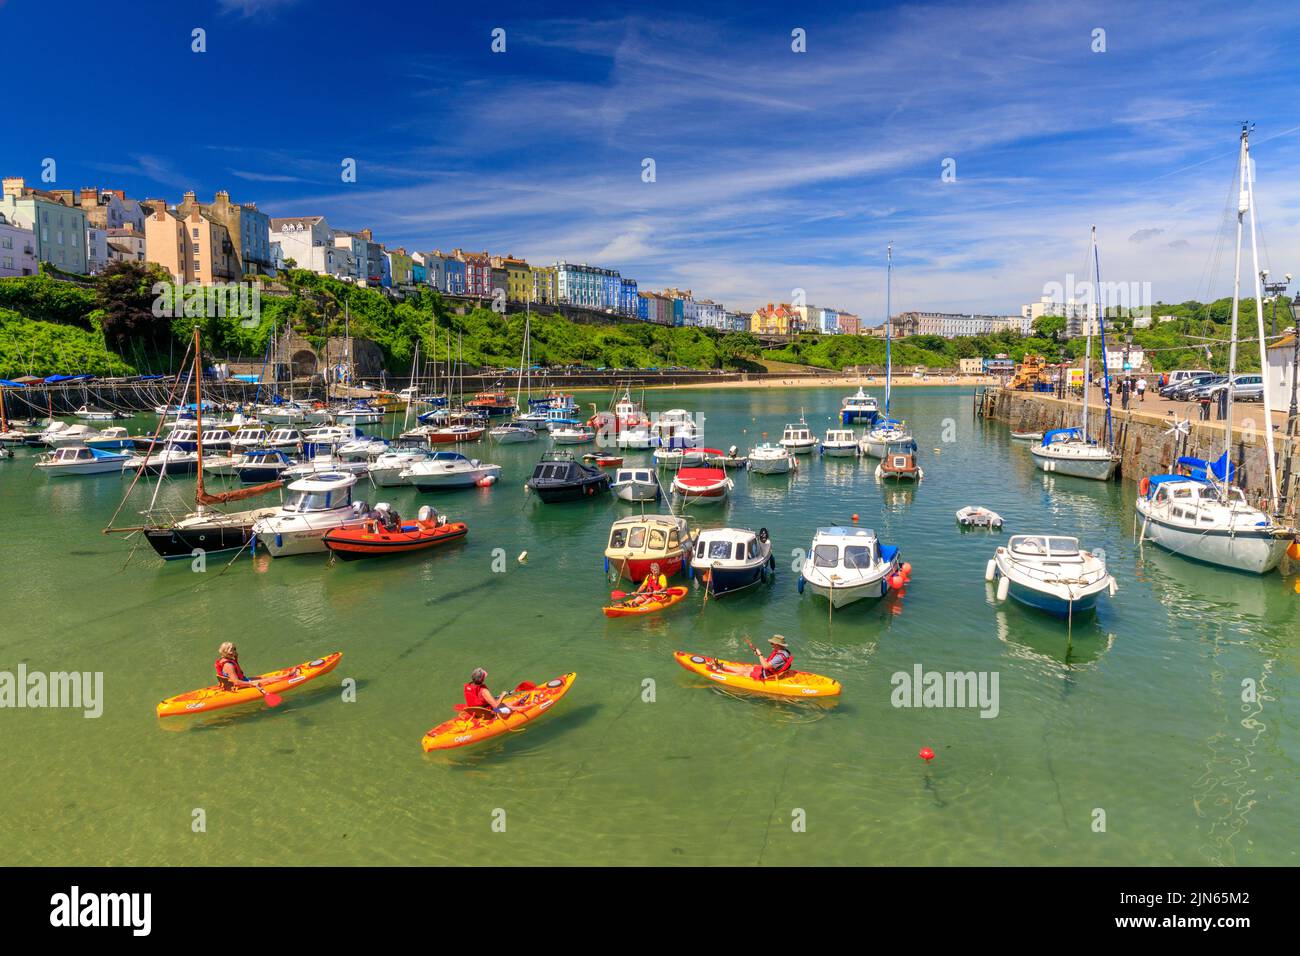 A group of sea kayakers in the picturesque sheltered harbour, overlooked by rows of colourful houses in Tenby, Pembrokeshire, Wales, UK Stock Photo